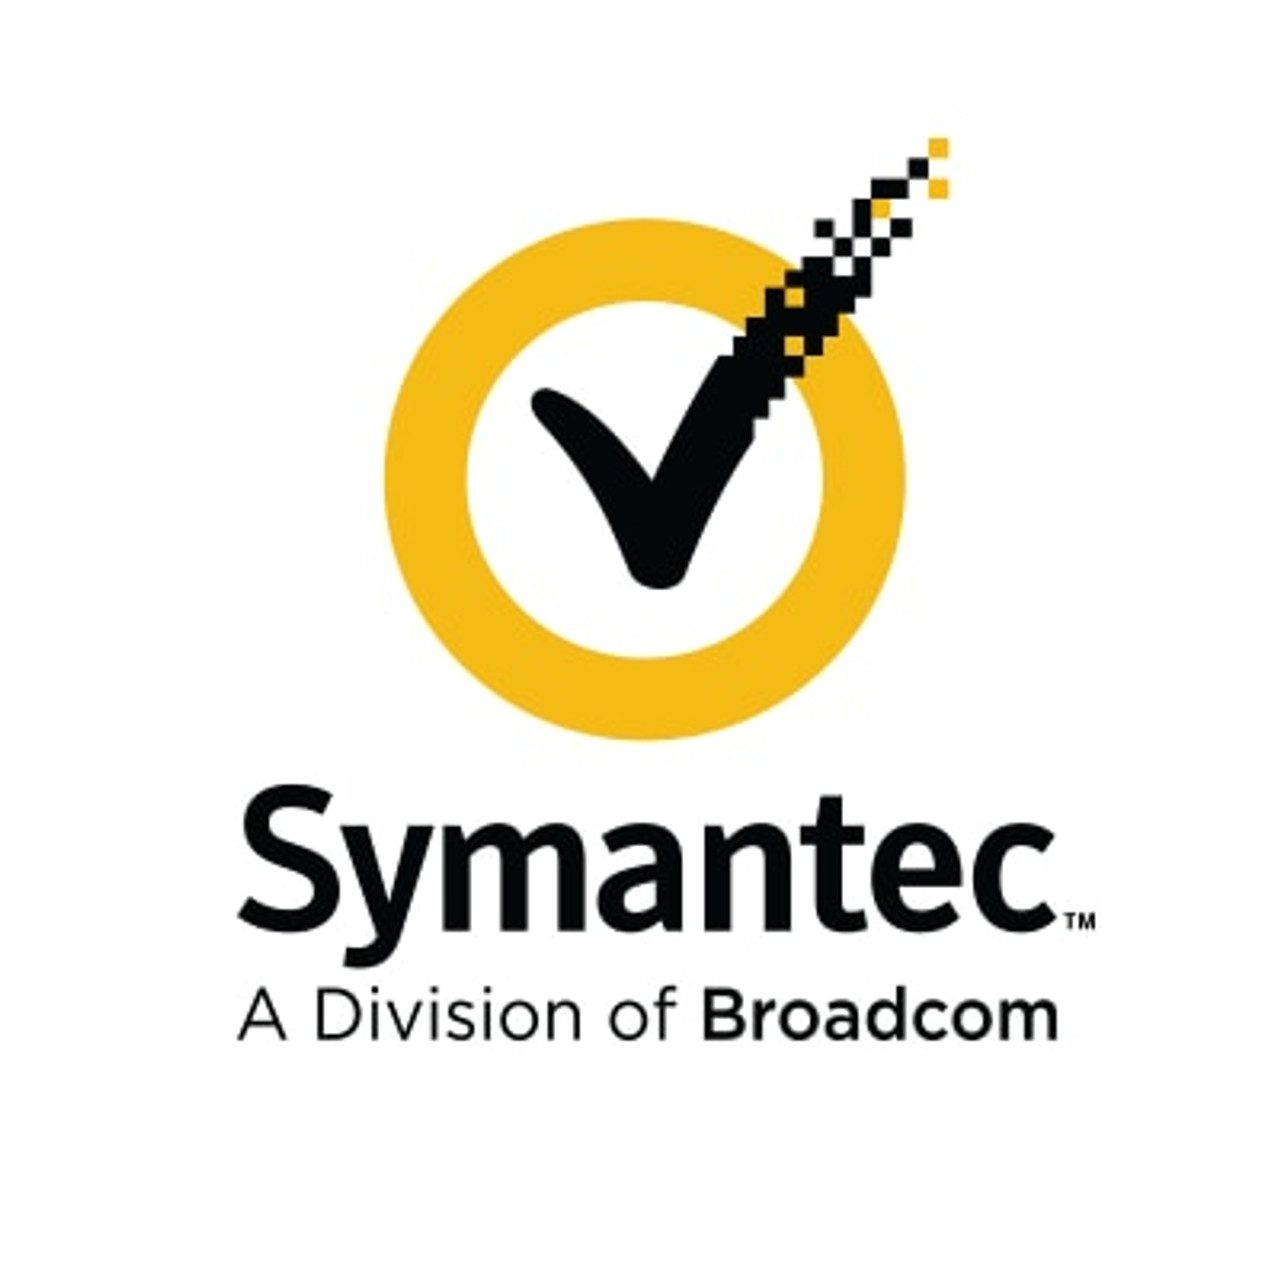 Symantec Complete Endpoint Defense (with SEP), Renewal Hybrid Subscription License with Support, 5,000-9,999 Devices 1 YR